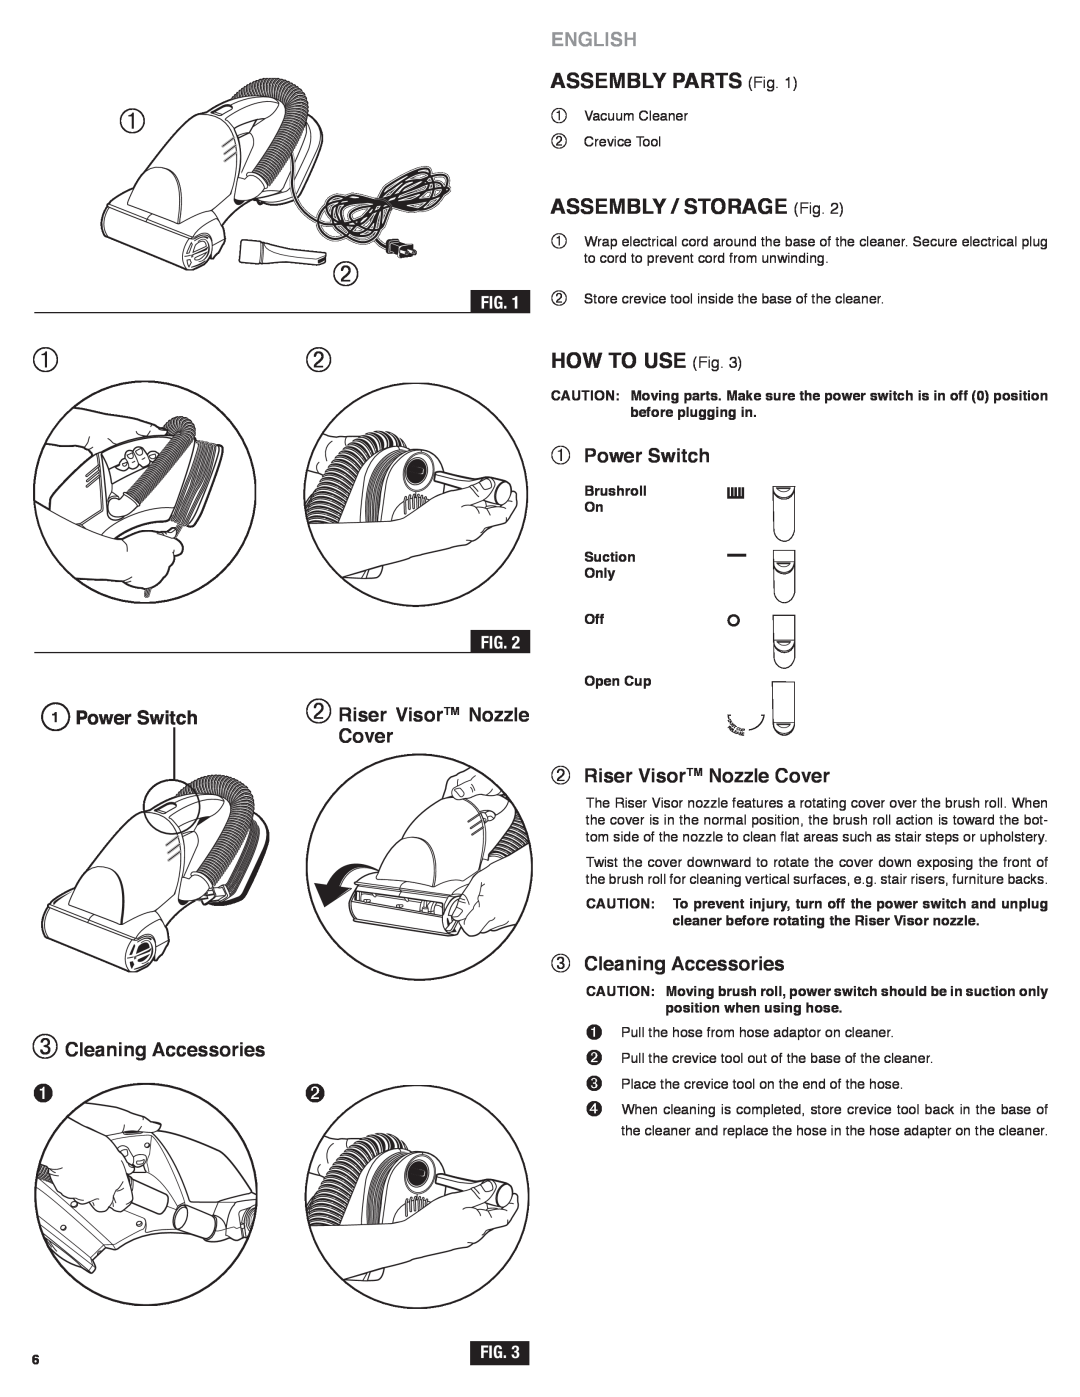 Eureka! Tents 60 manual ➁ Riser Visor tm nozzle, Cover, ➂ Cleaning accessories, Power Switch, English, aSSemBlY PaRtS Fig 